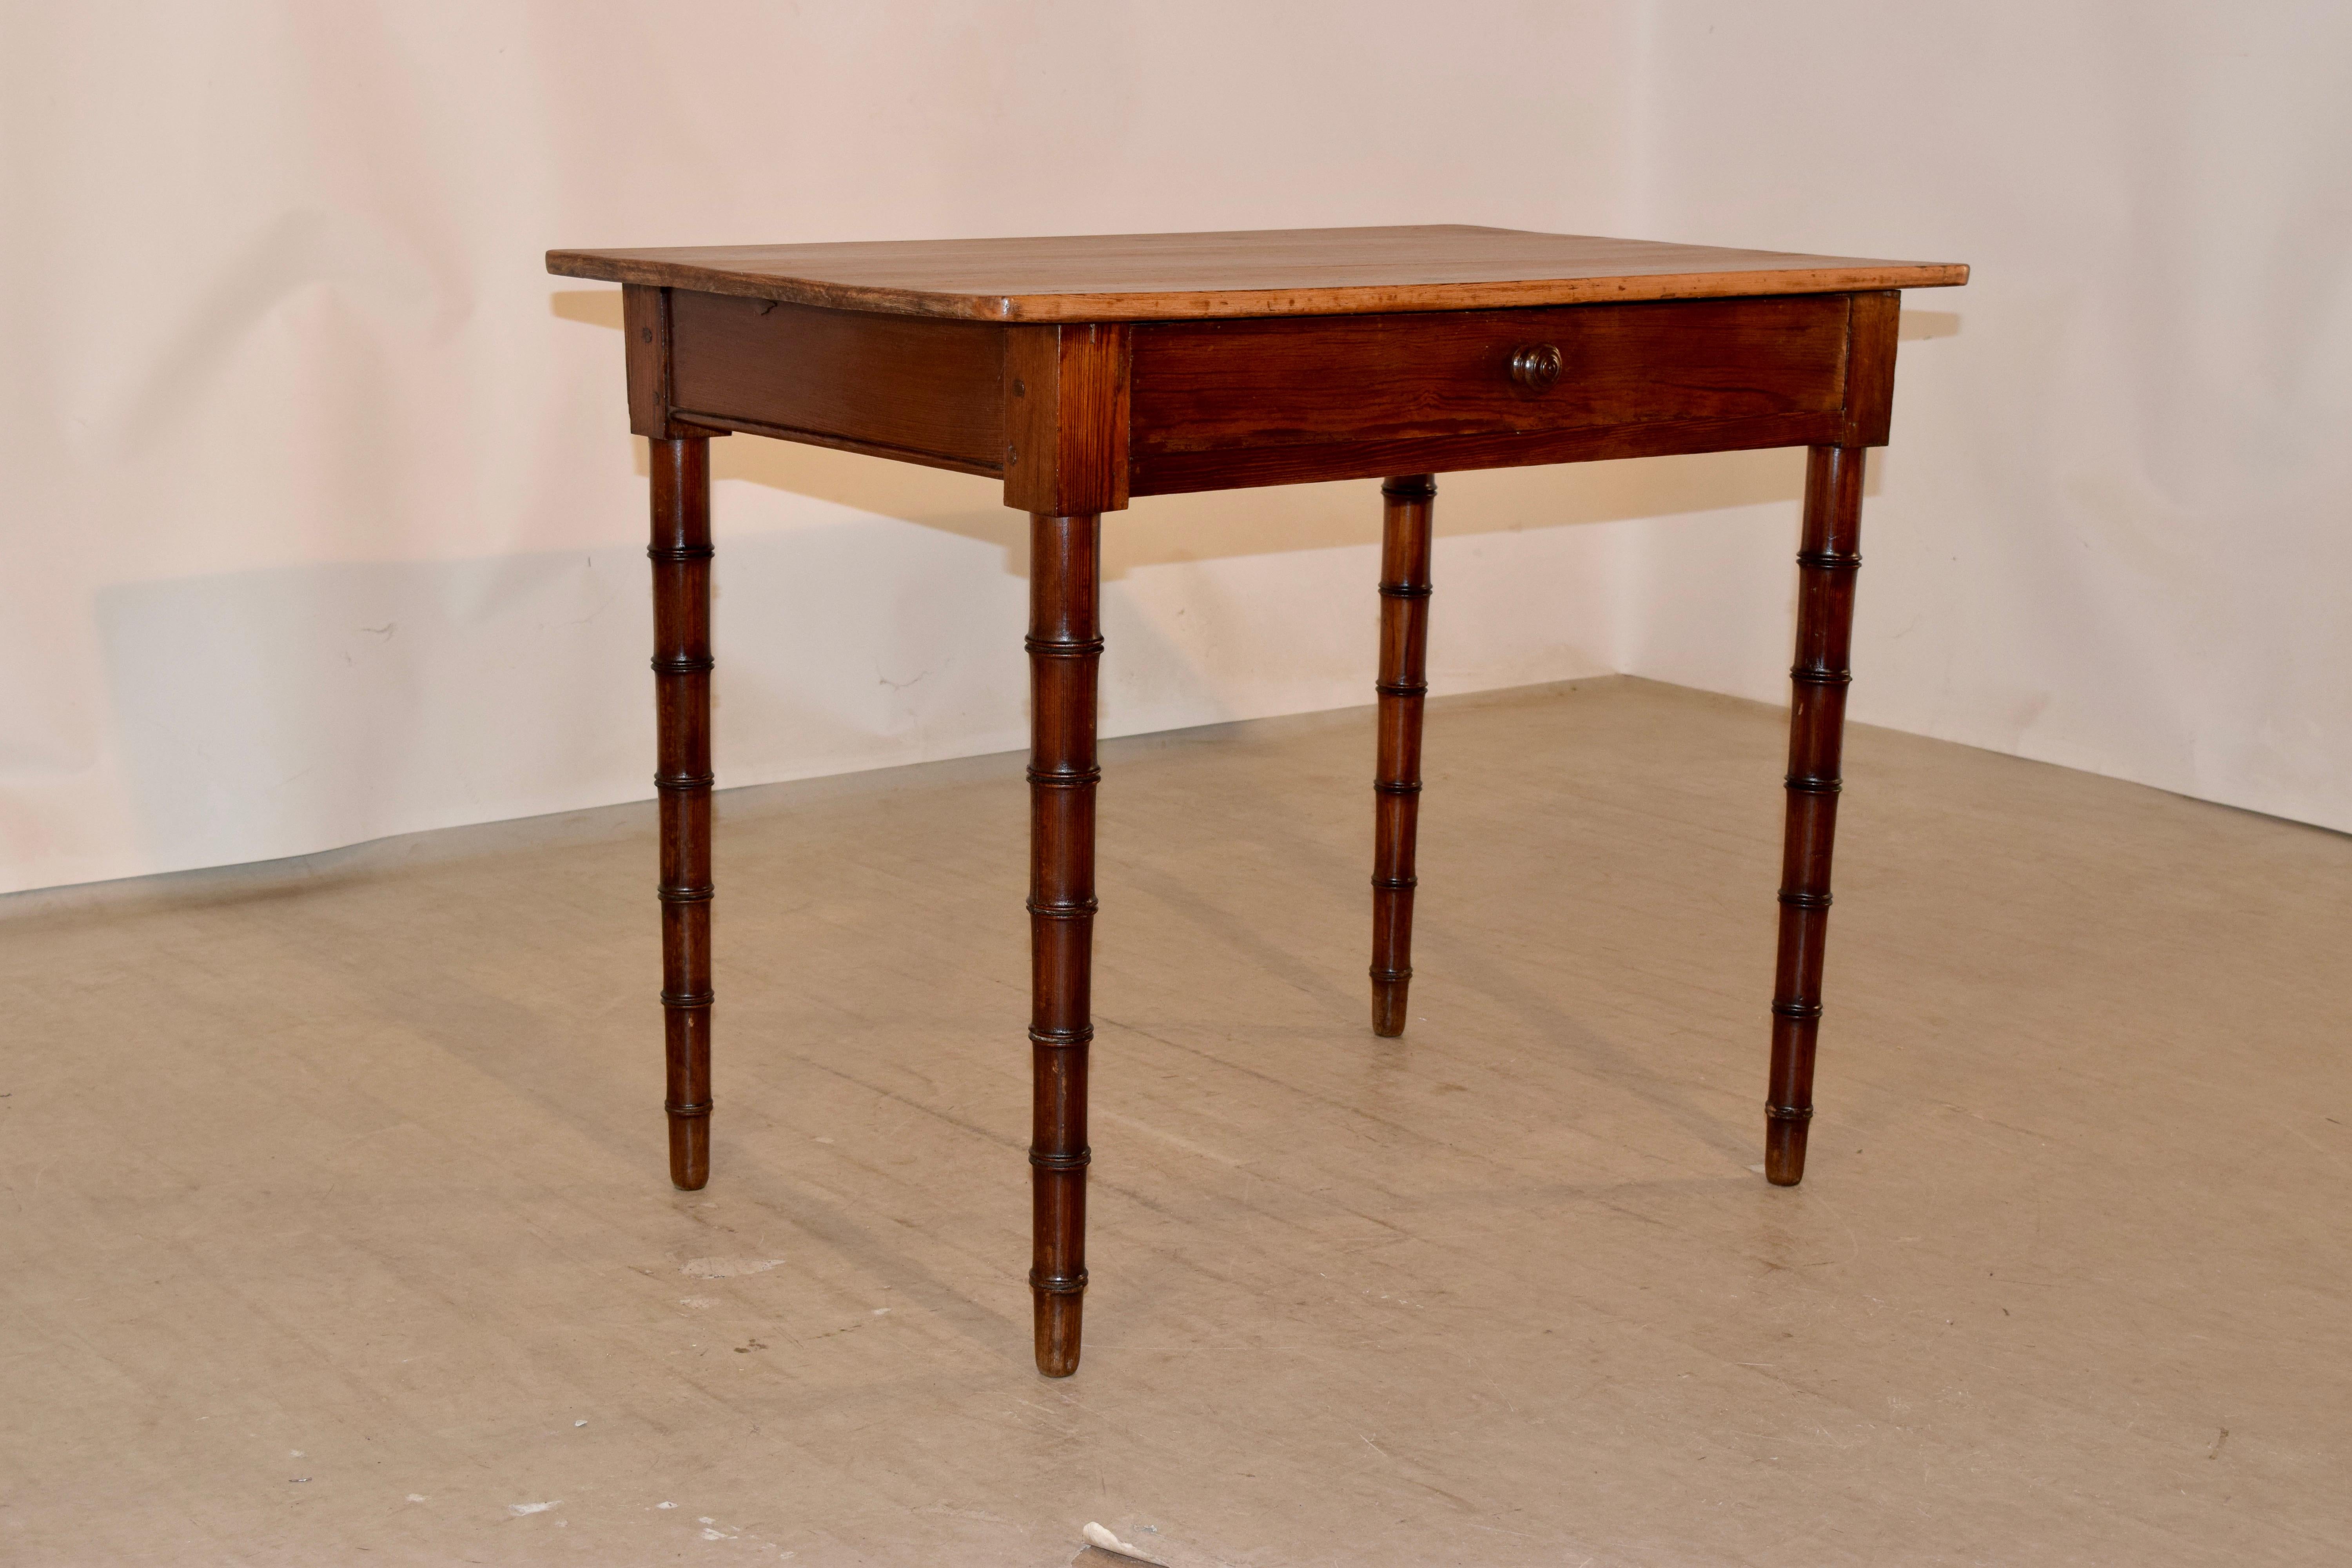 19th century pitch pine side table from England with faux bamboo turnings on the legs. The top is scrubbed and has wonderful patina and character.